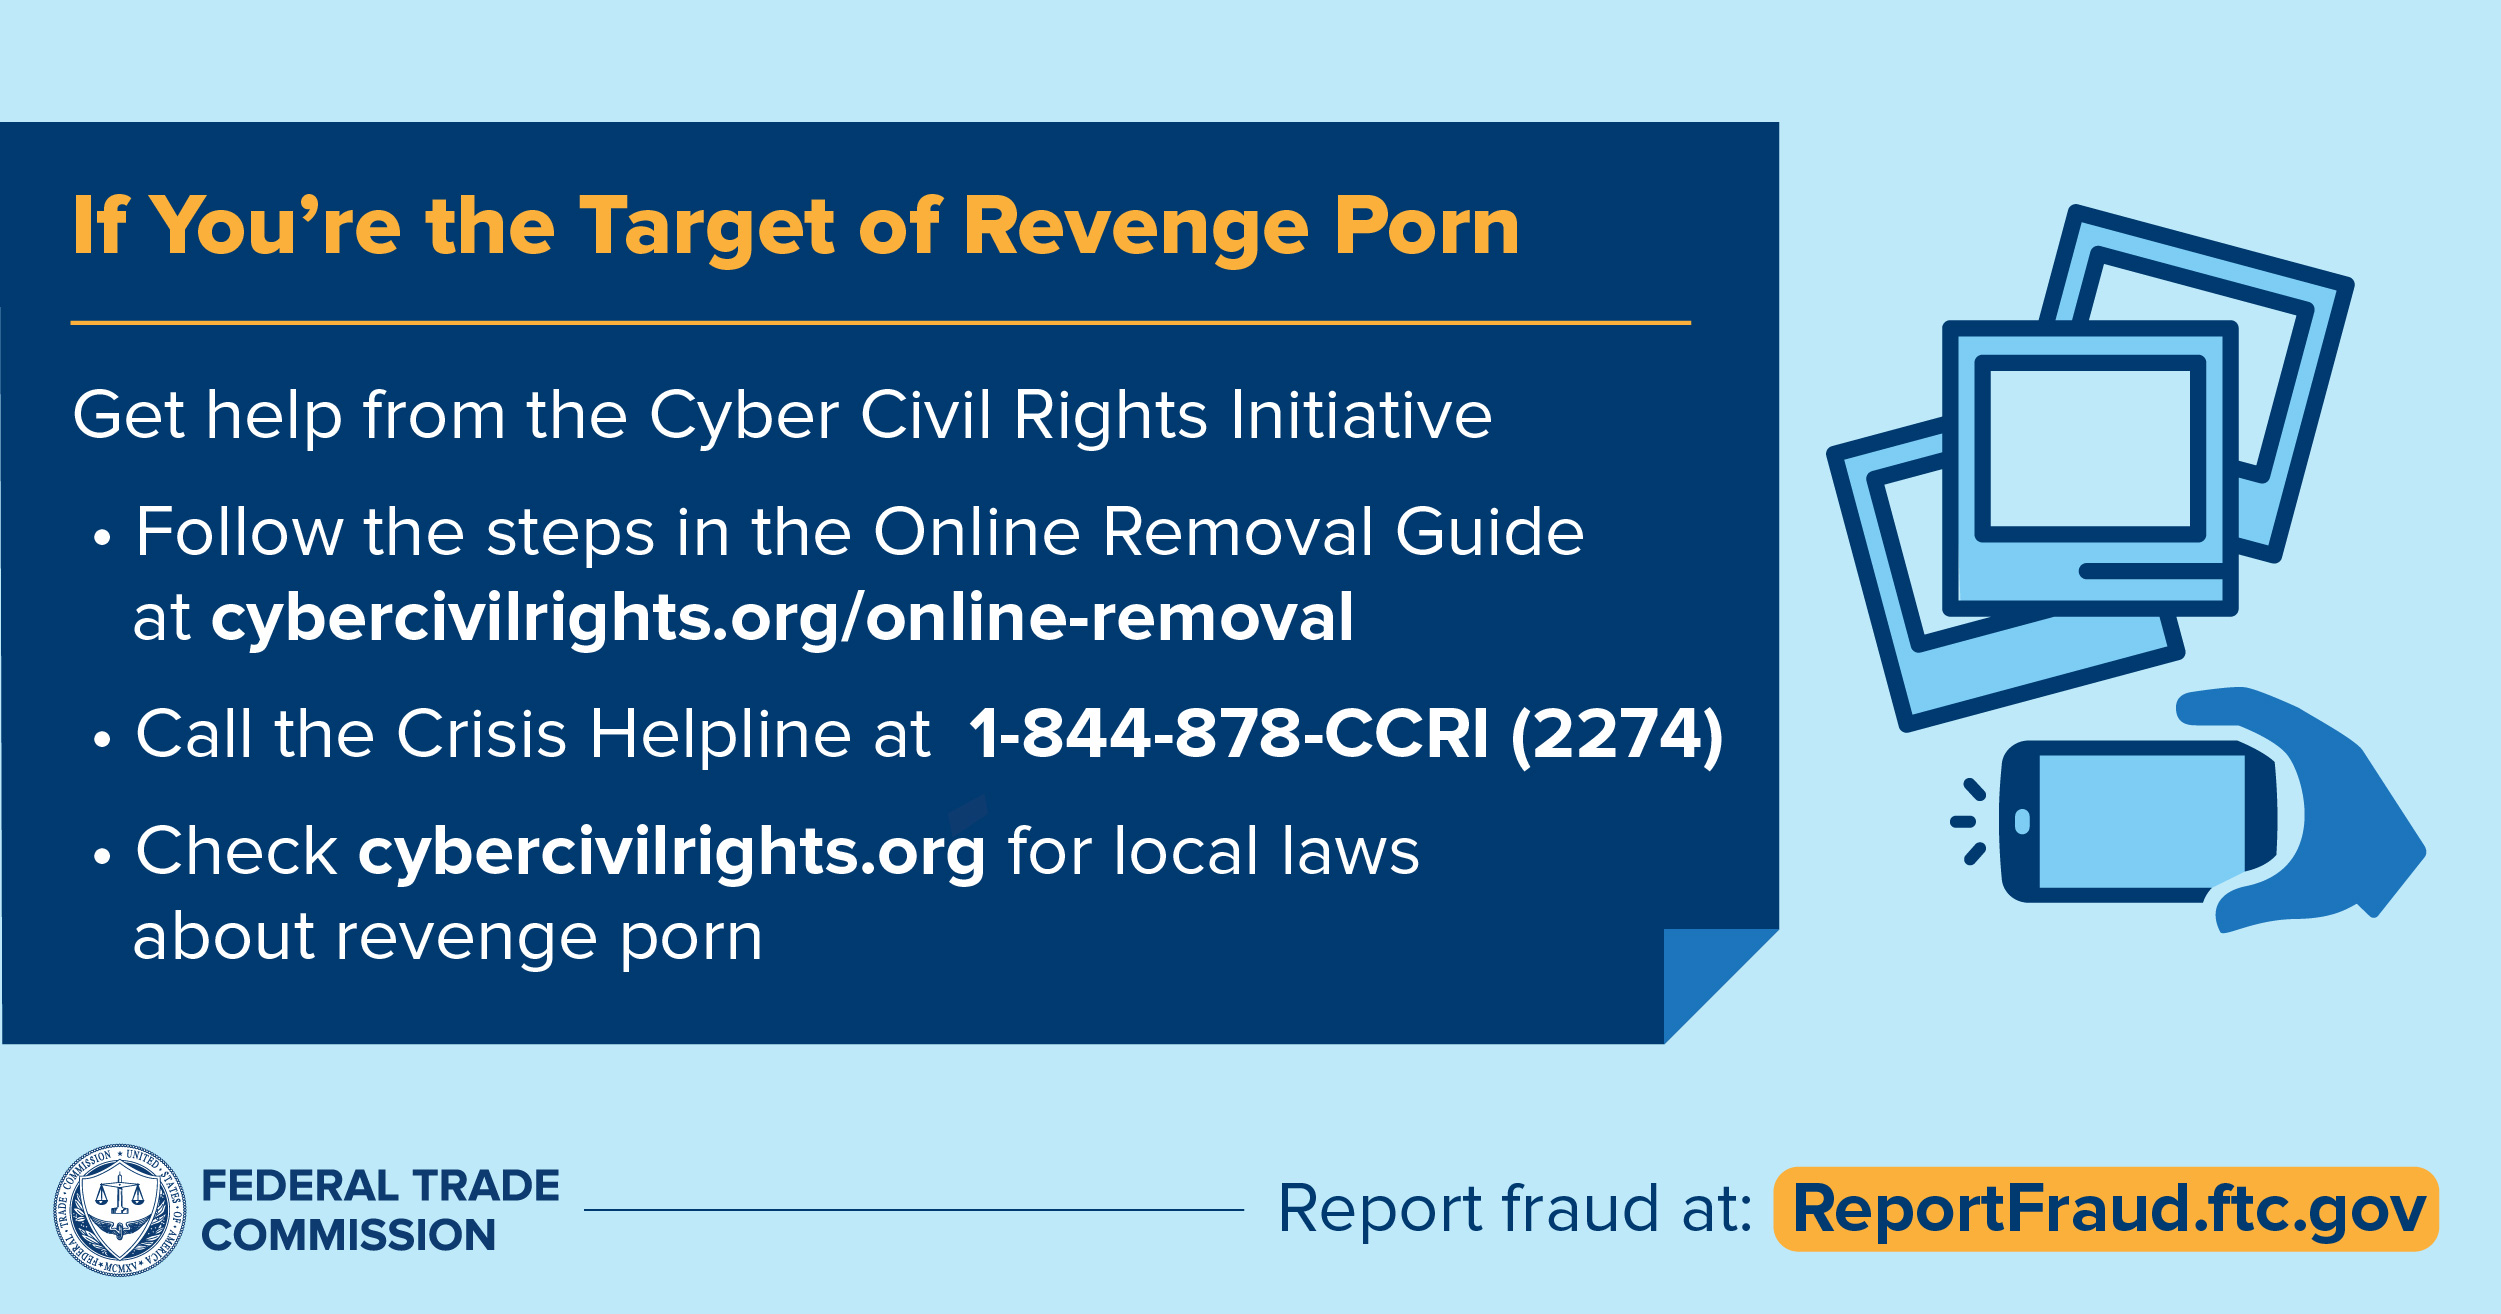 Revenage Porn - What To Do if You're the Target of Revenge Porn | Consumer Advice